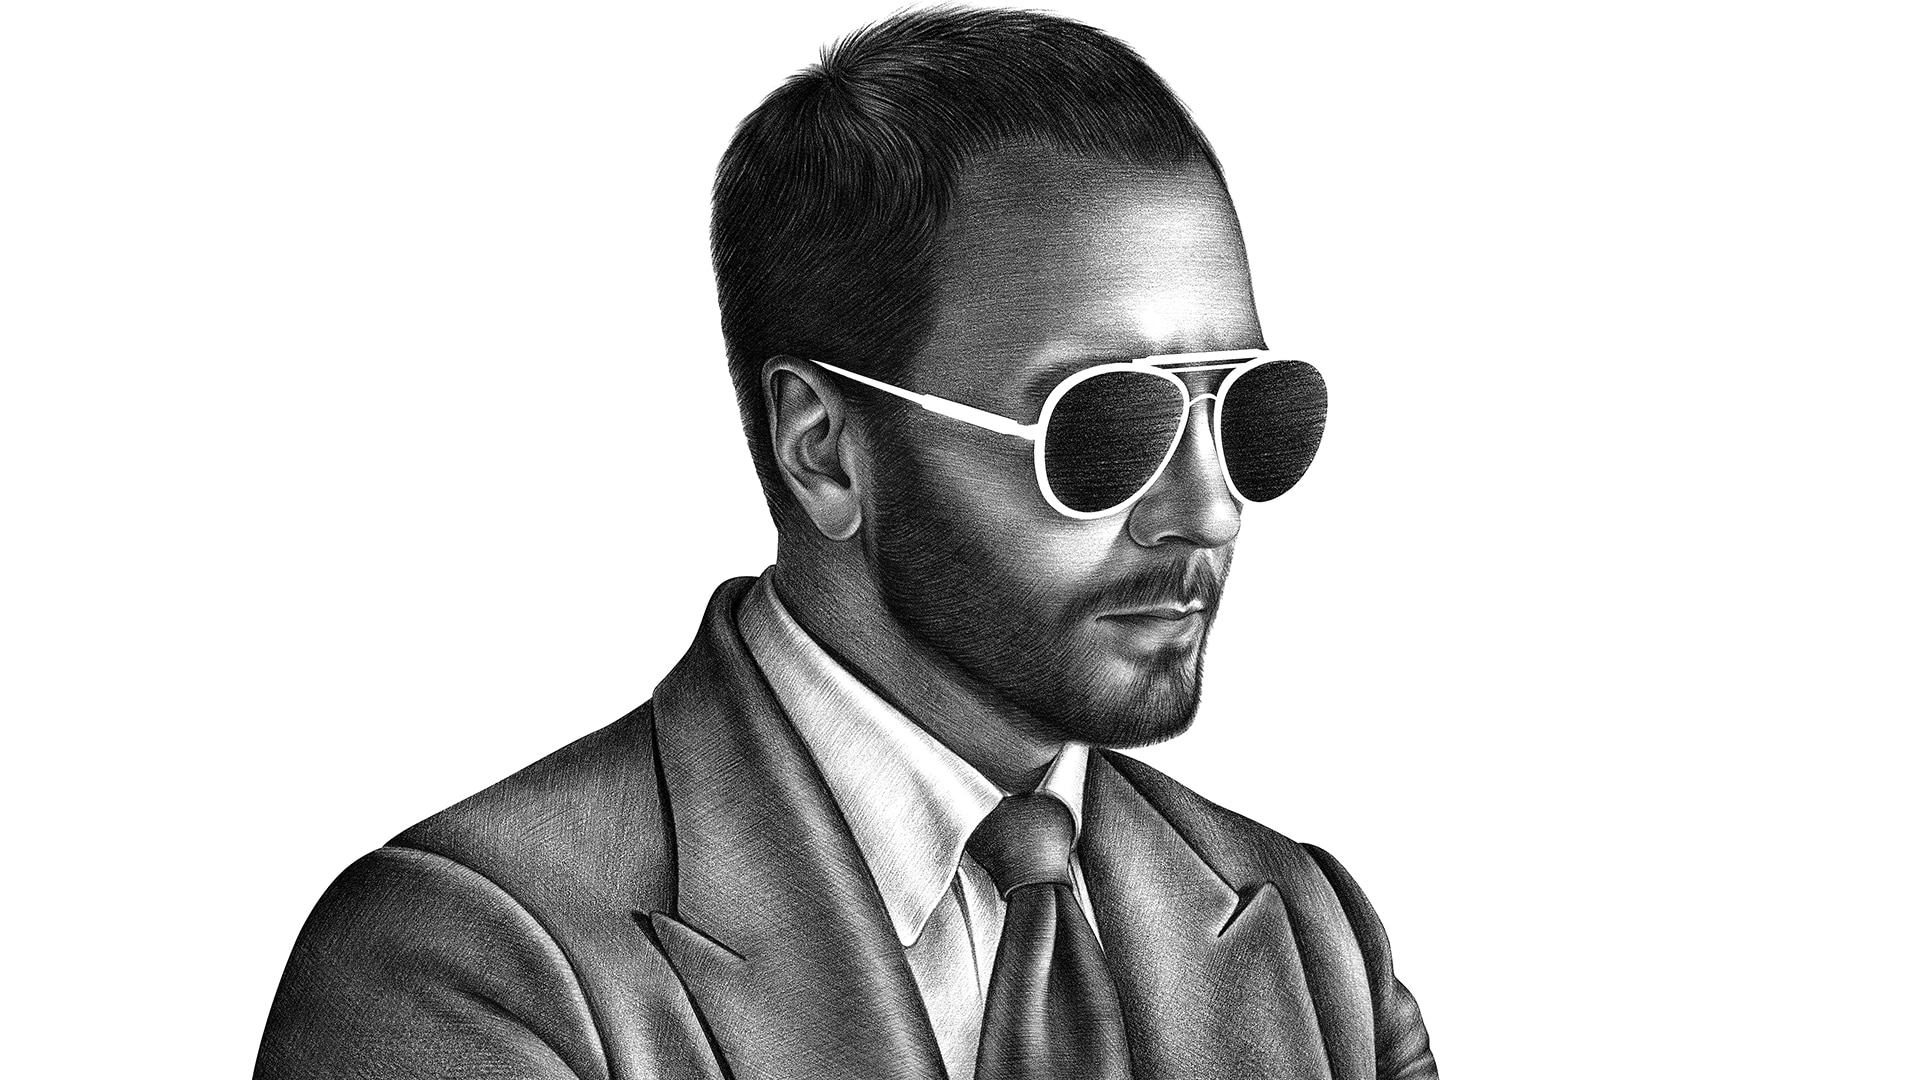 Tom Ford Fanpage - Read his bio and the latest news, the fashion designer